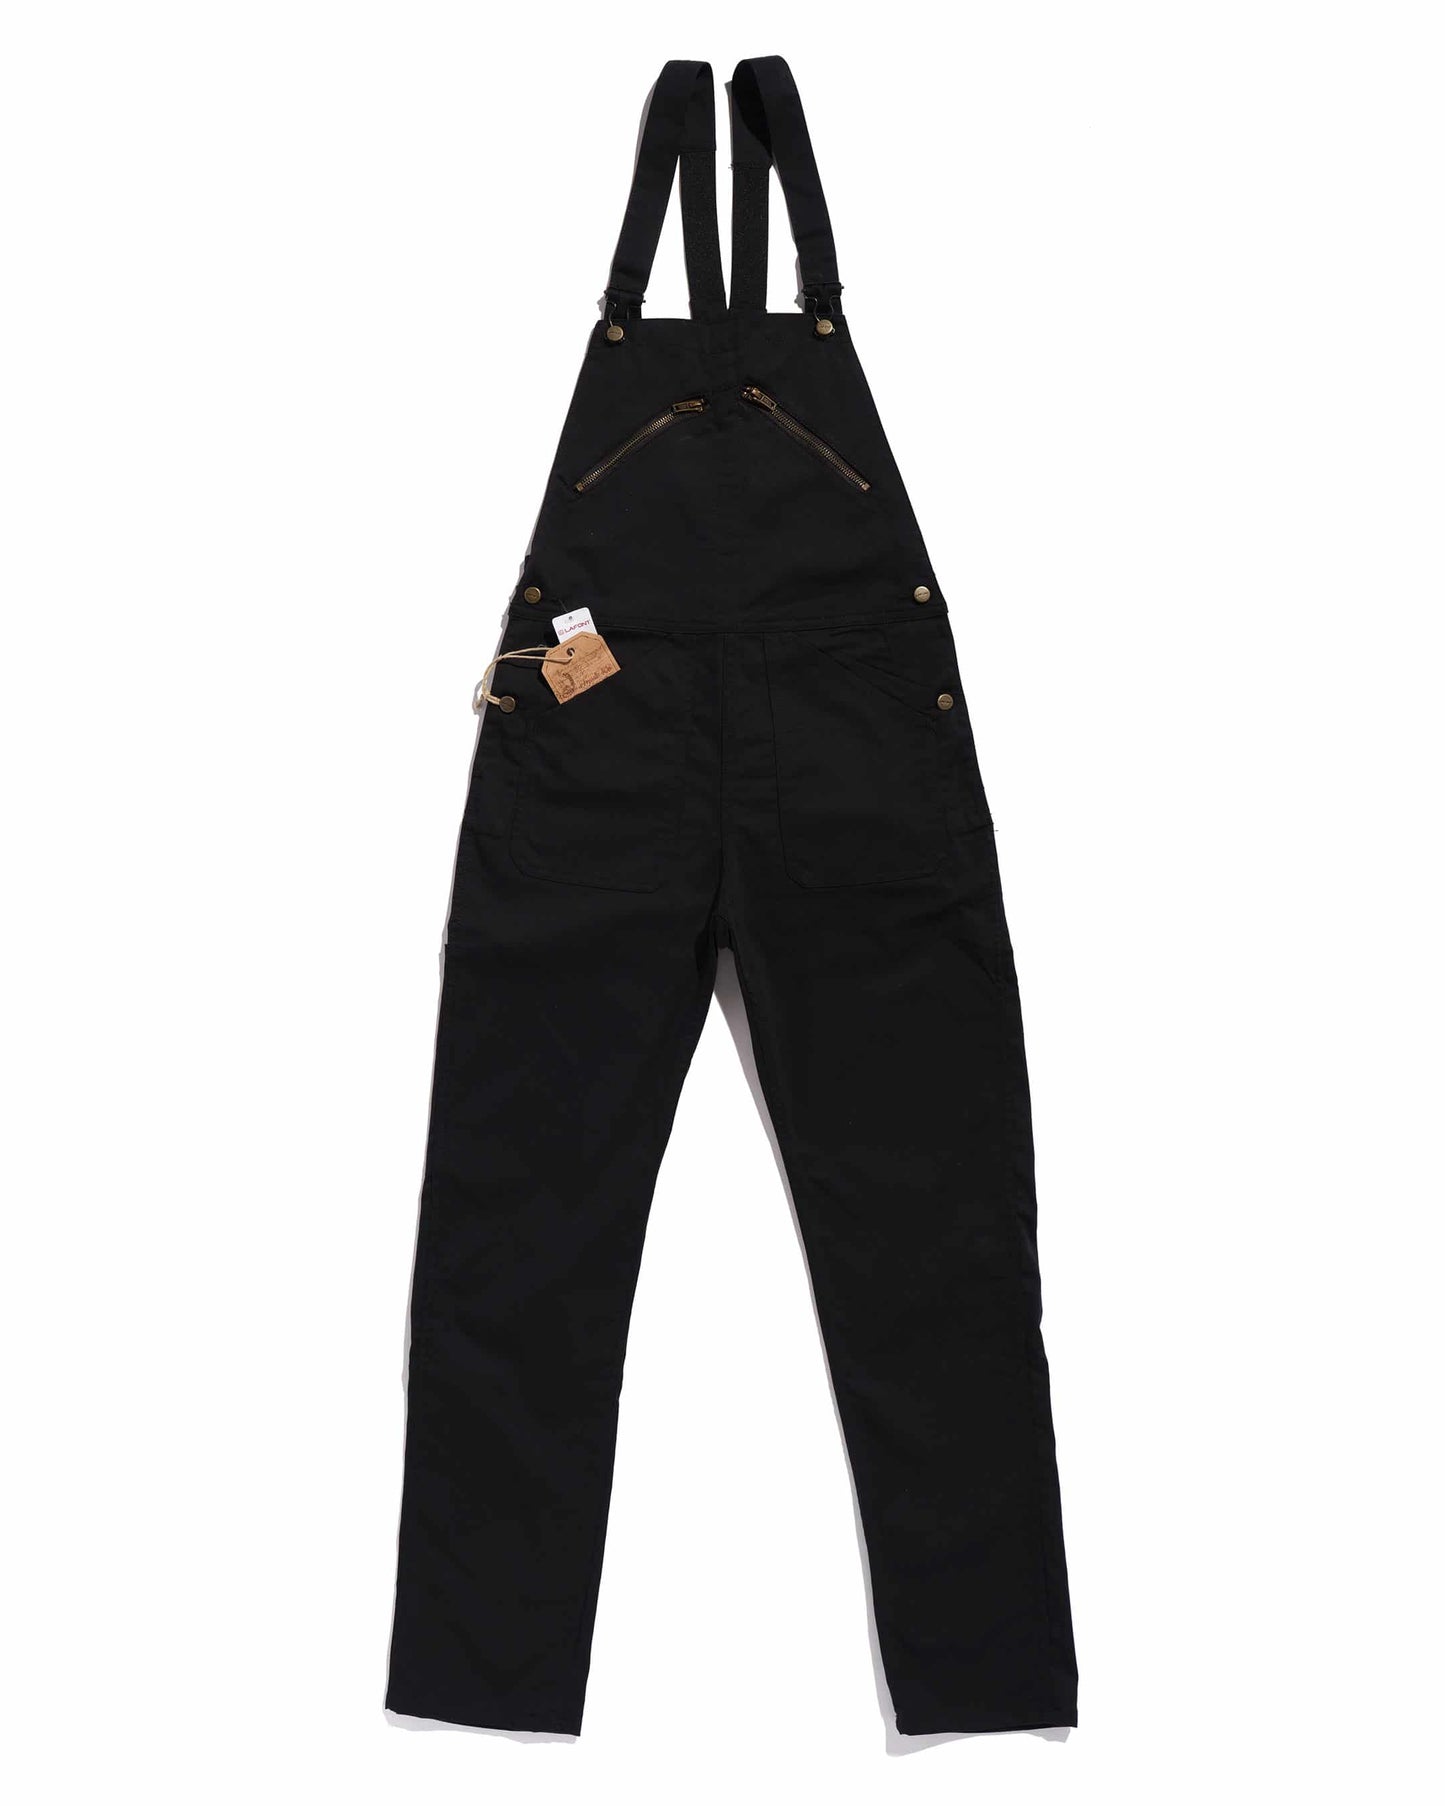 406 “sophie” polycotton overalls